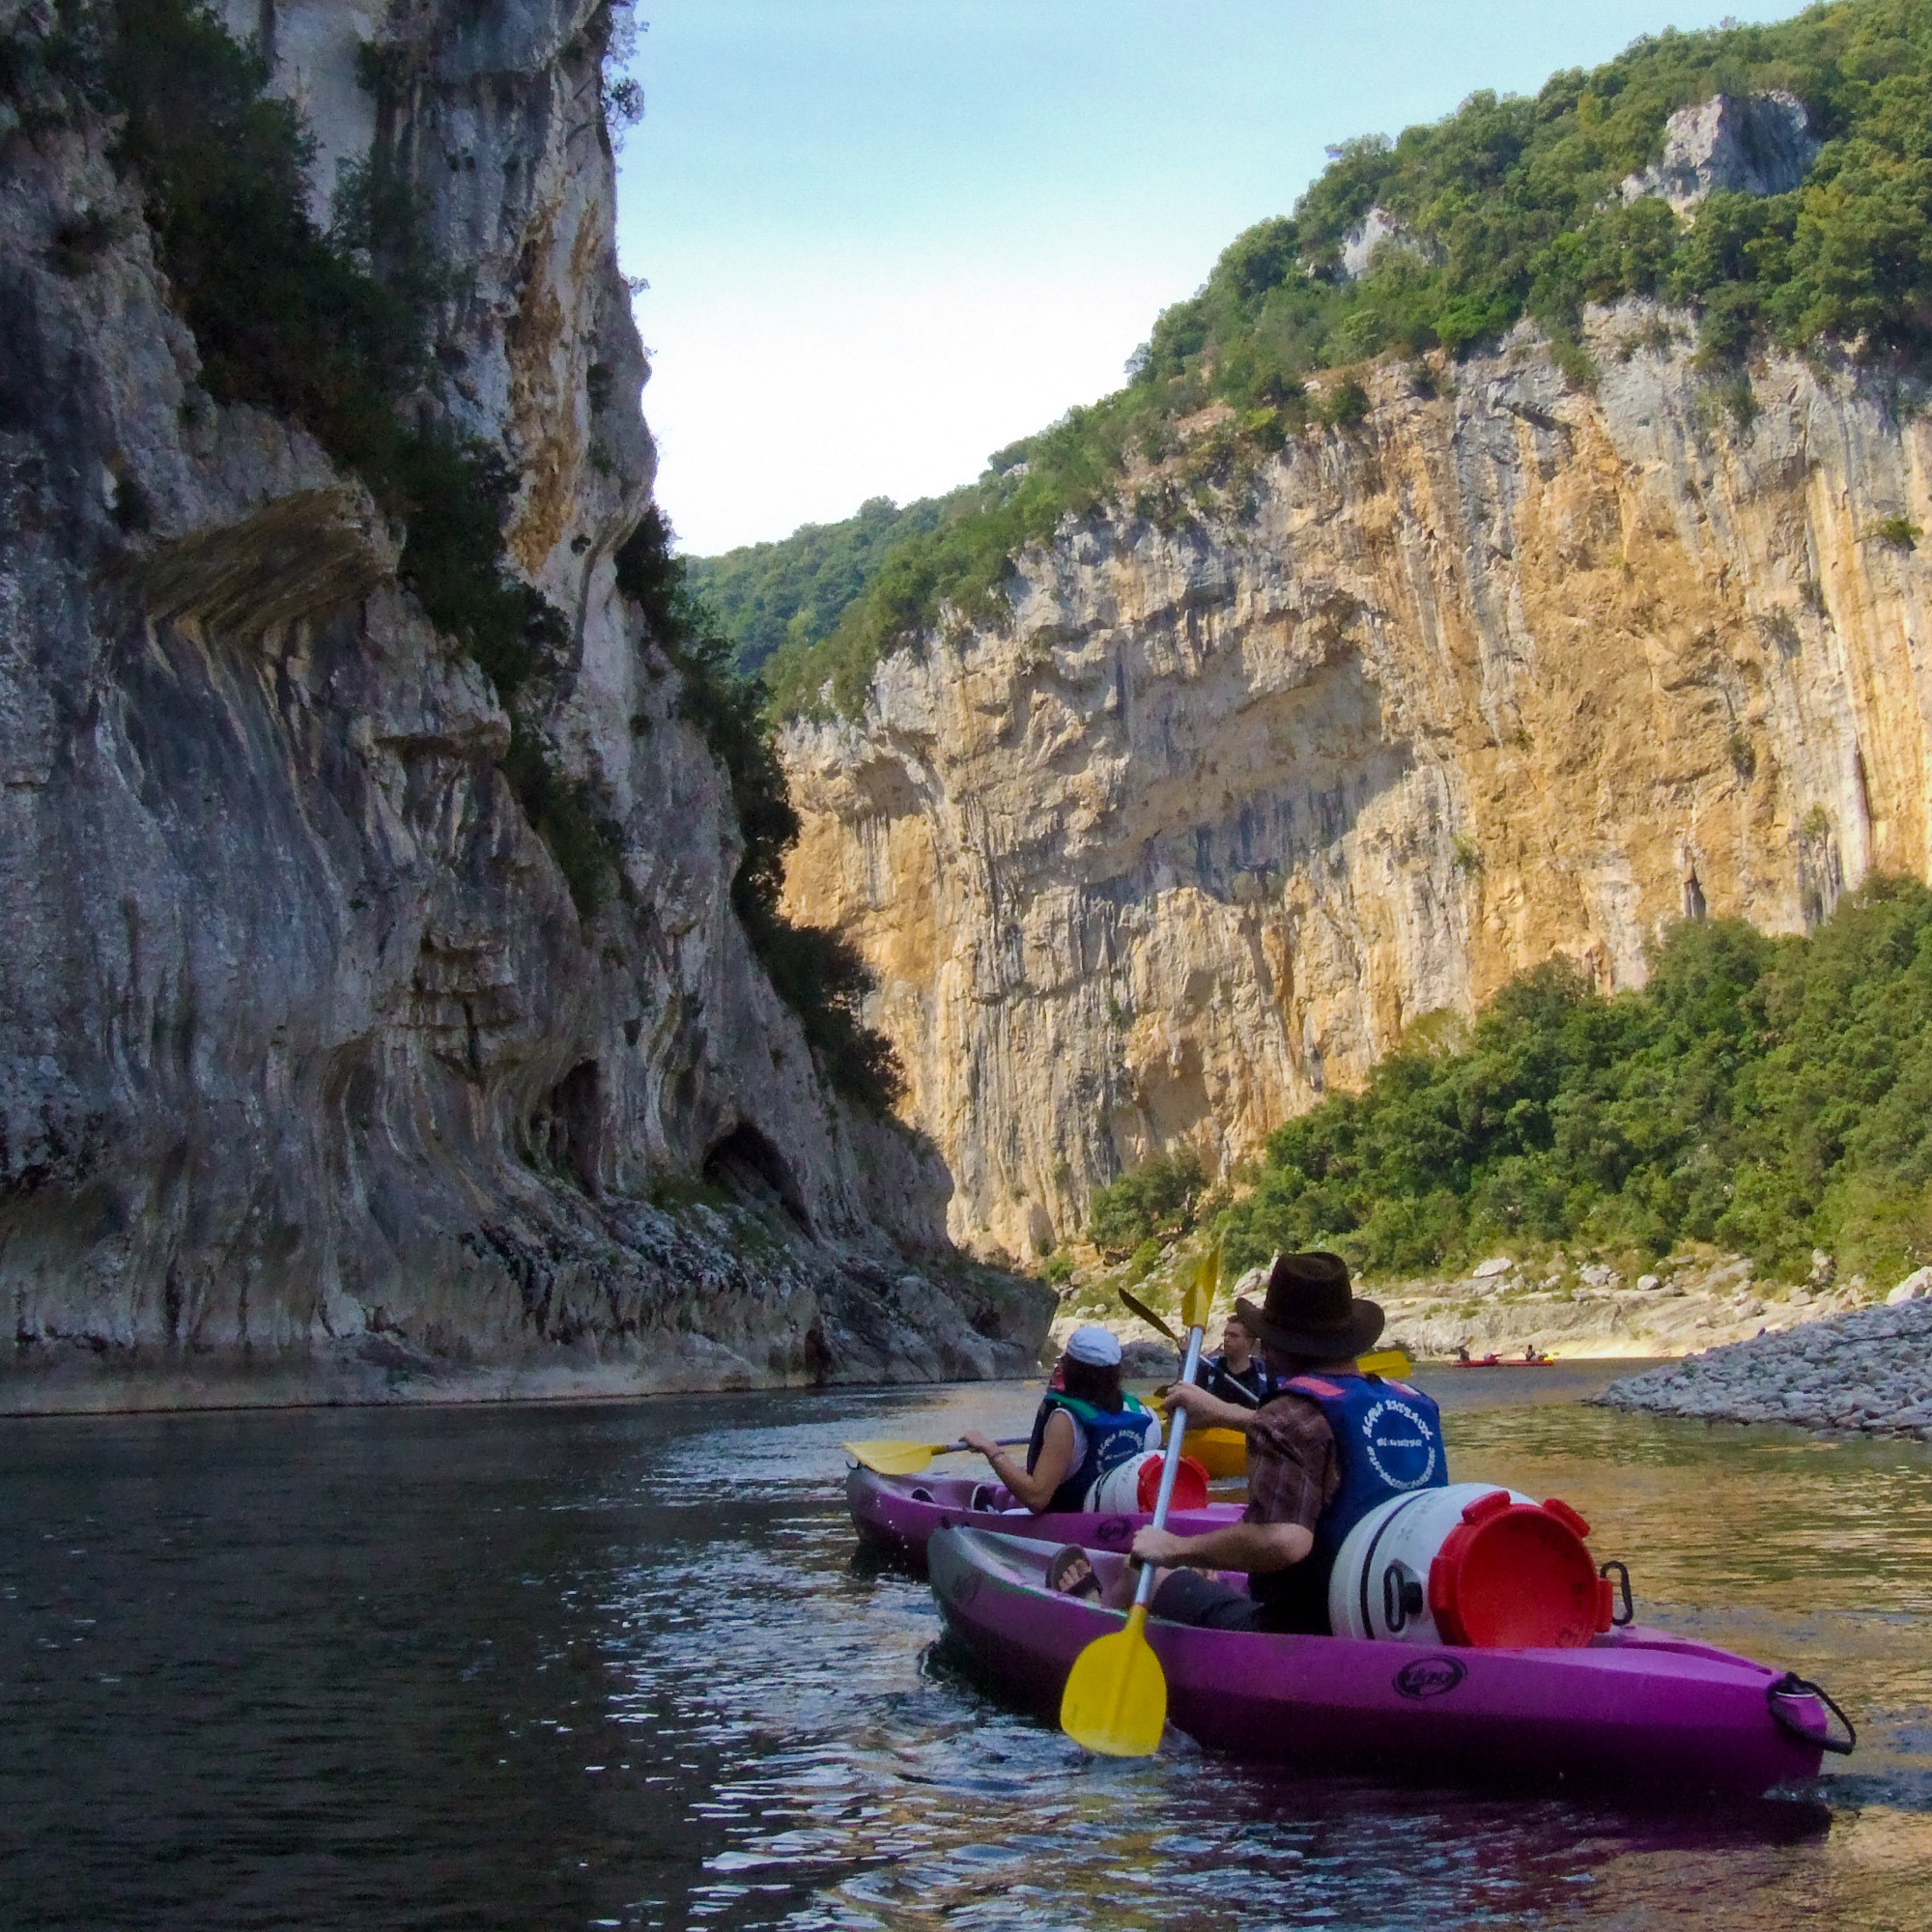 Canoeing on the Ardèche